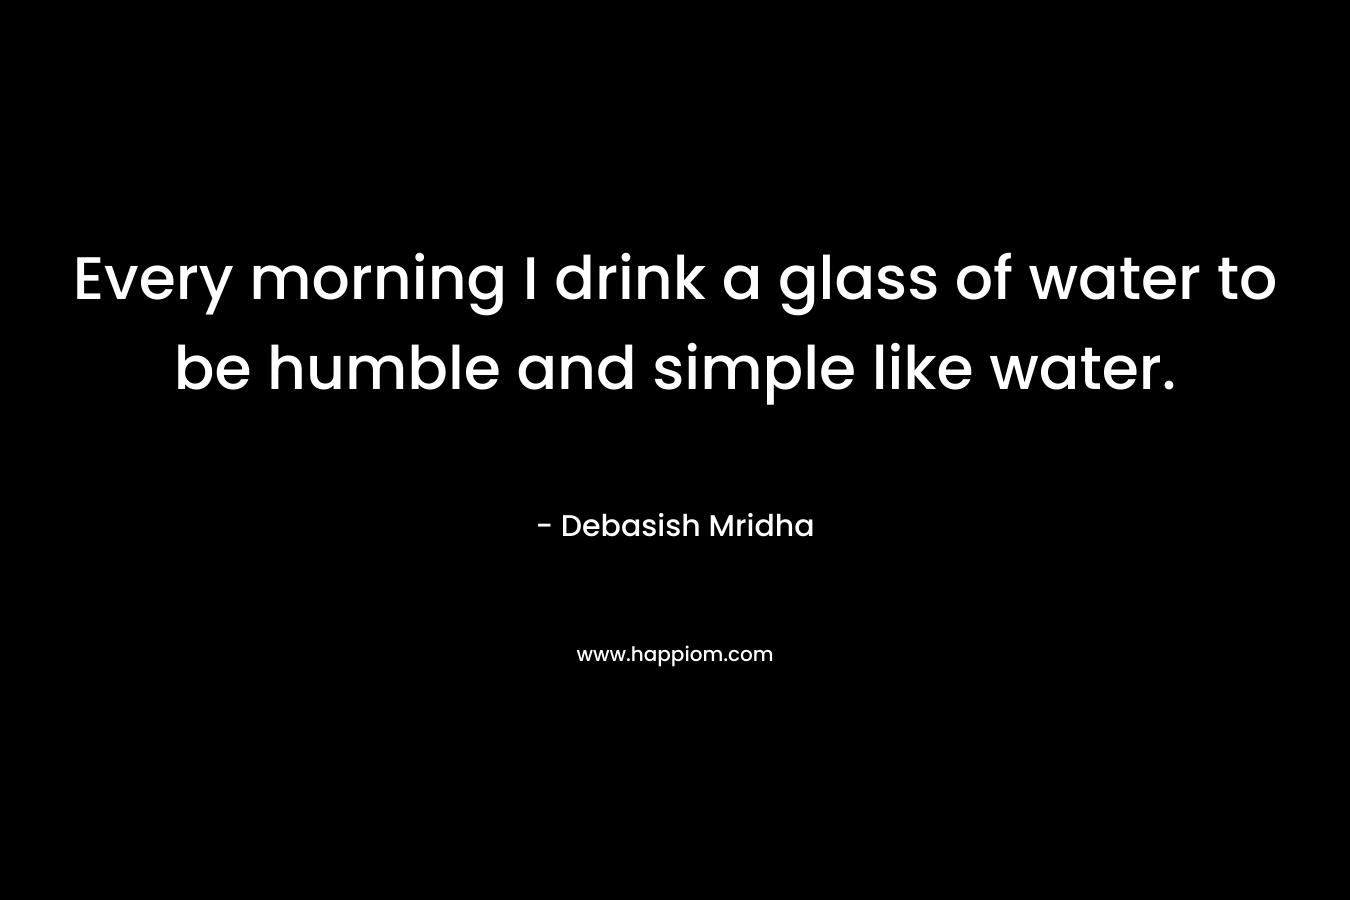 Every morning I drink a glass of water to be humble and simple like water. – Debasish Mridha